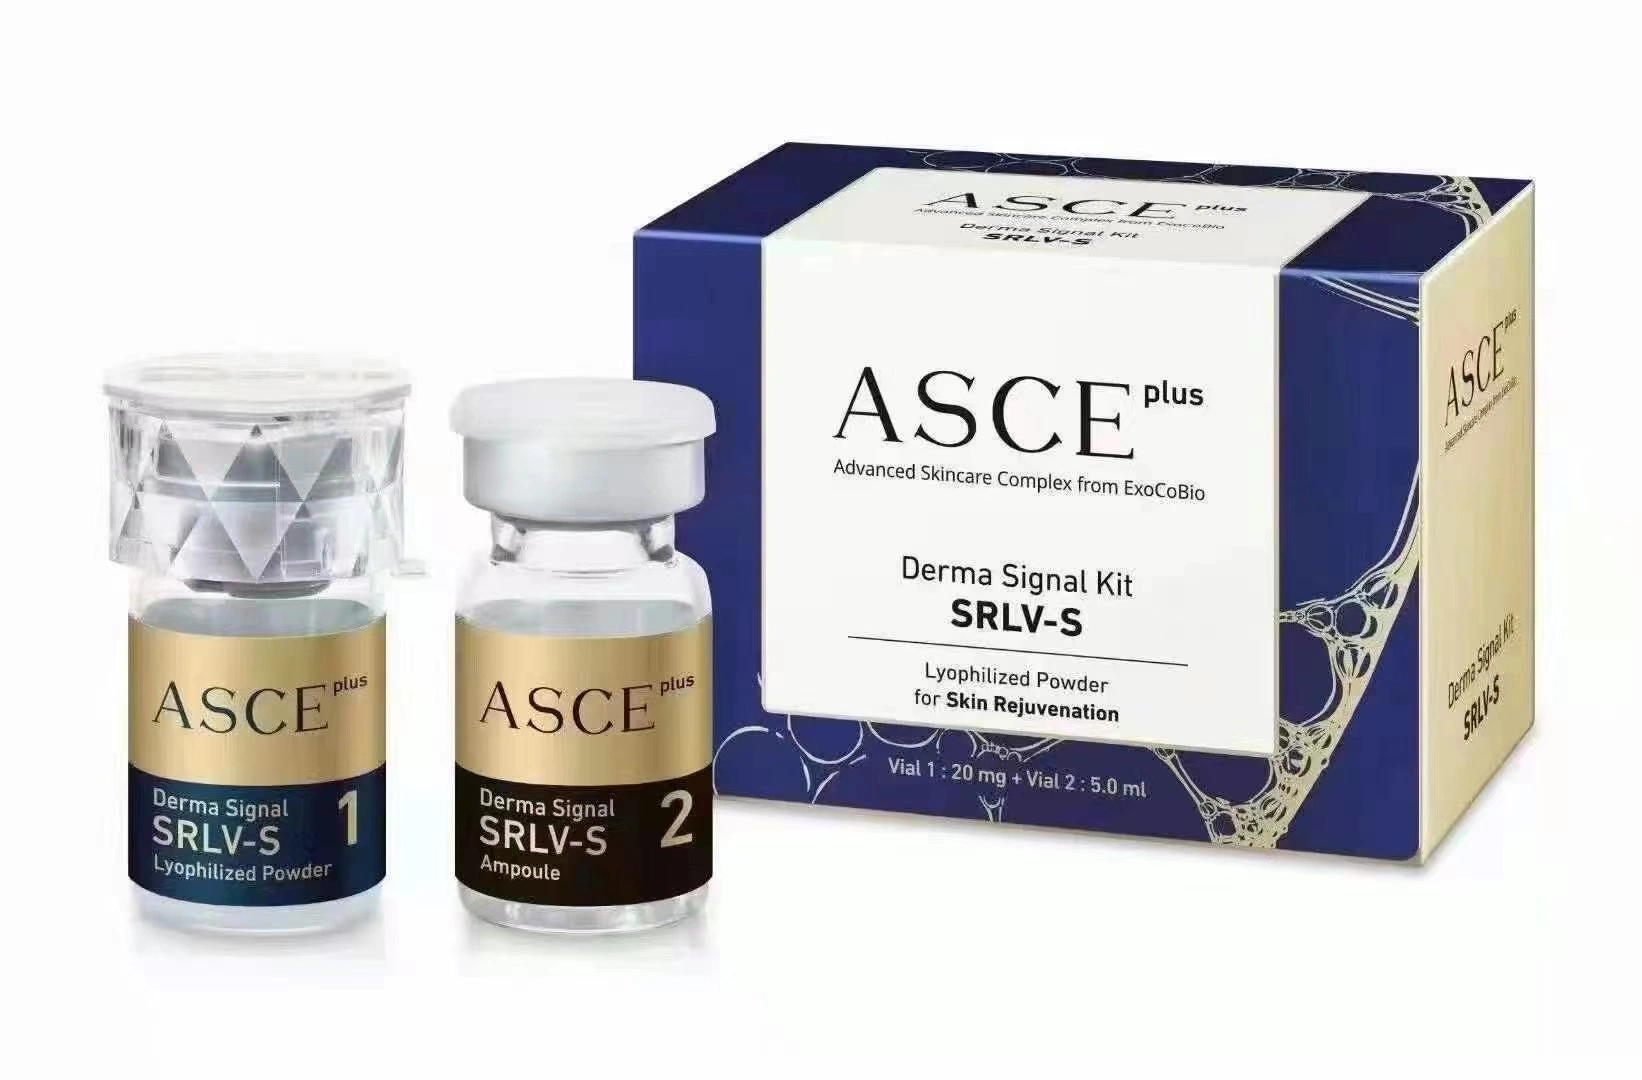 Exosome Asce Plus Brighten Skin Cell Regeneration Anti-Aging Asce Plus Derma Signal Kit Srlv-S Lyophilized Powder Acne Exosome Solution Repair Mesotherapy